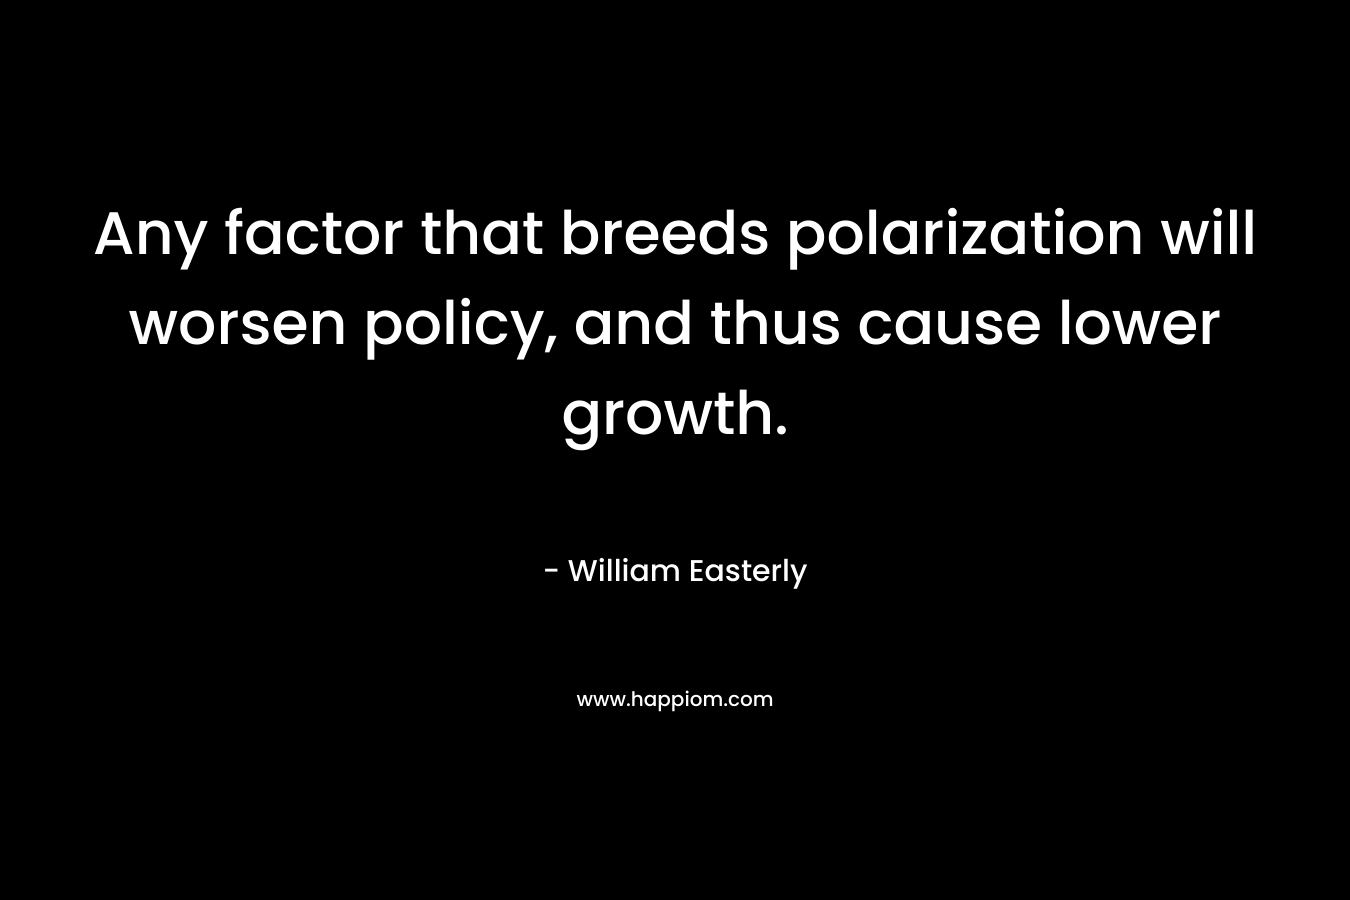 Any factor that breeds polarization will worsen policy, and thus cause lower growth. – William Easterly